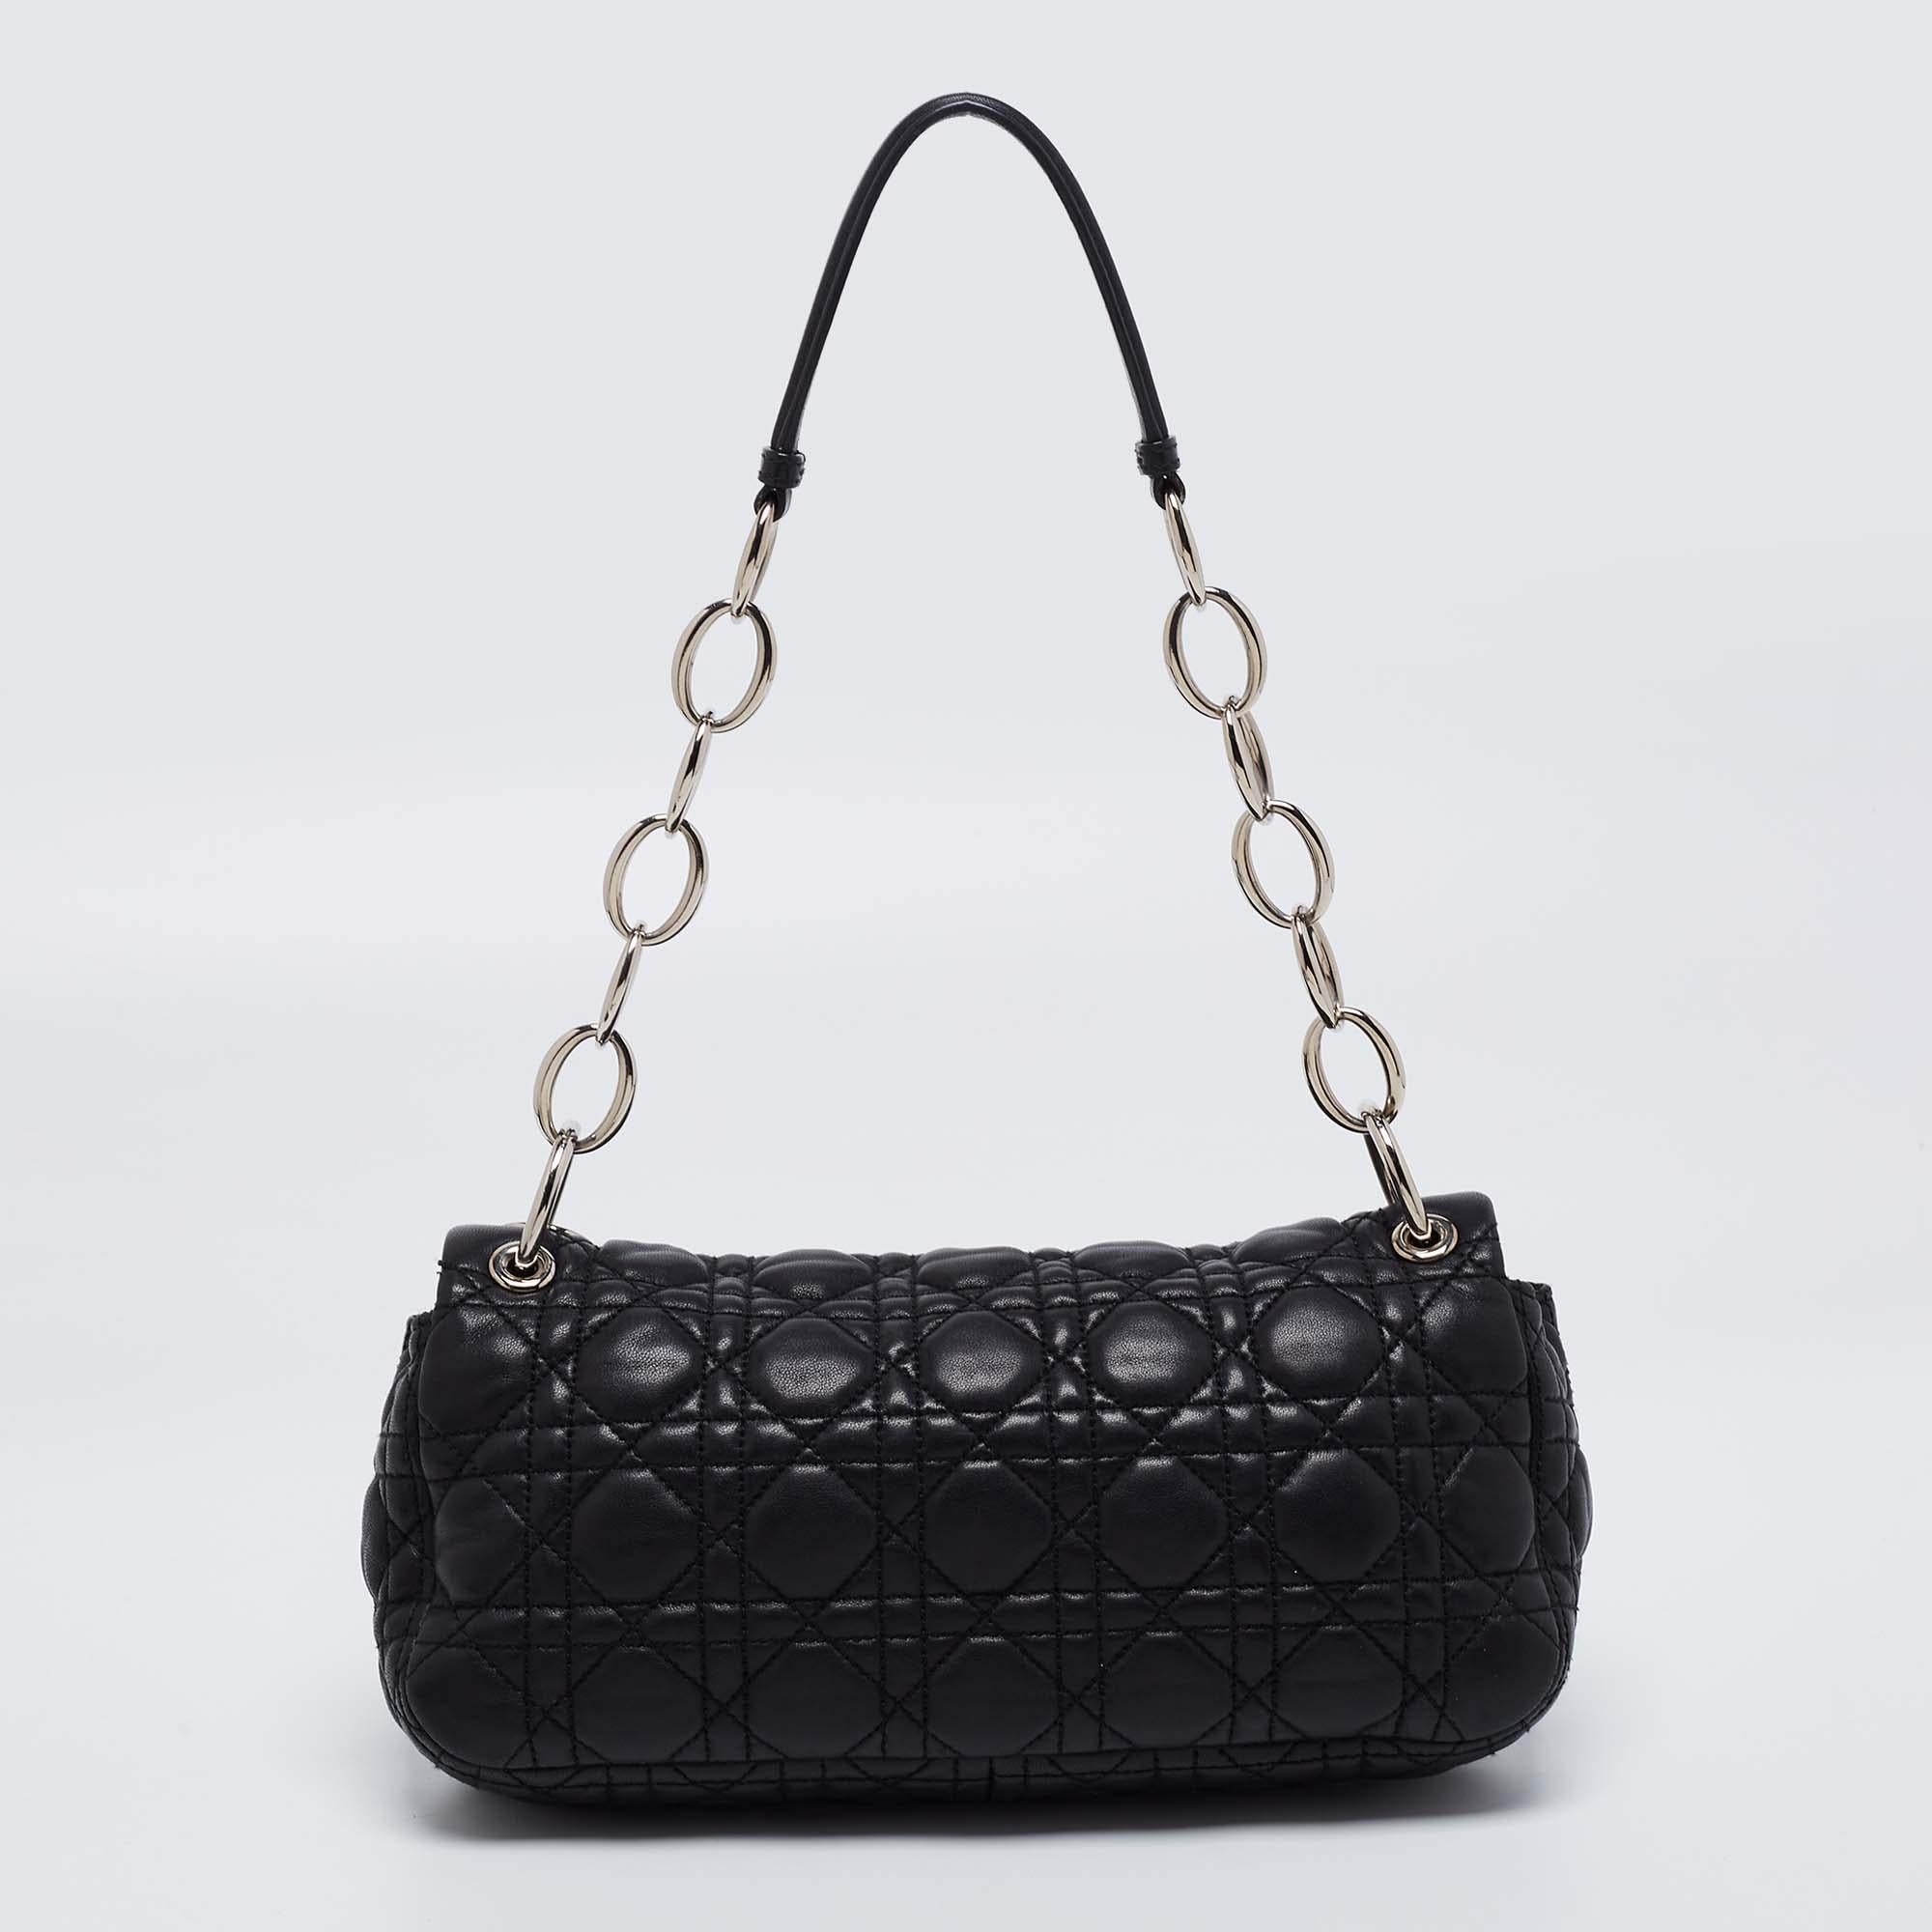 This black Rendezvous shoulder bag from Dior is chic and sophisticated. Crafted from black leather, it features a quilted design, chain-link strap with a leather shoulder pad, and dangling DIOR charms at the strap base. The iconic Dior closure opens